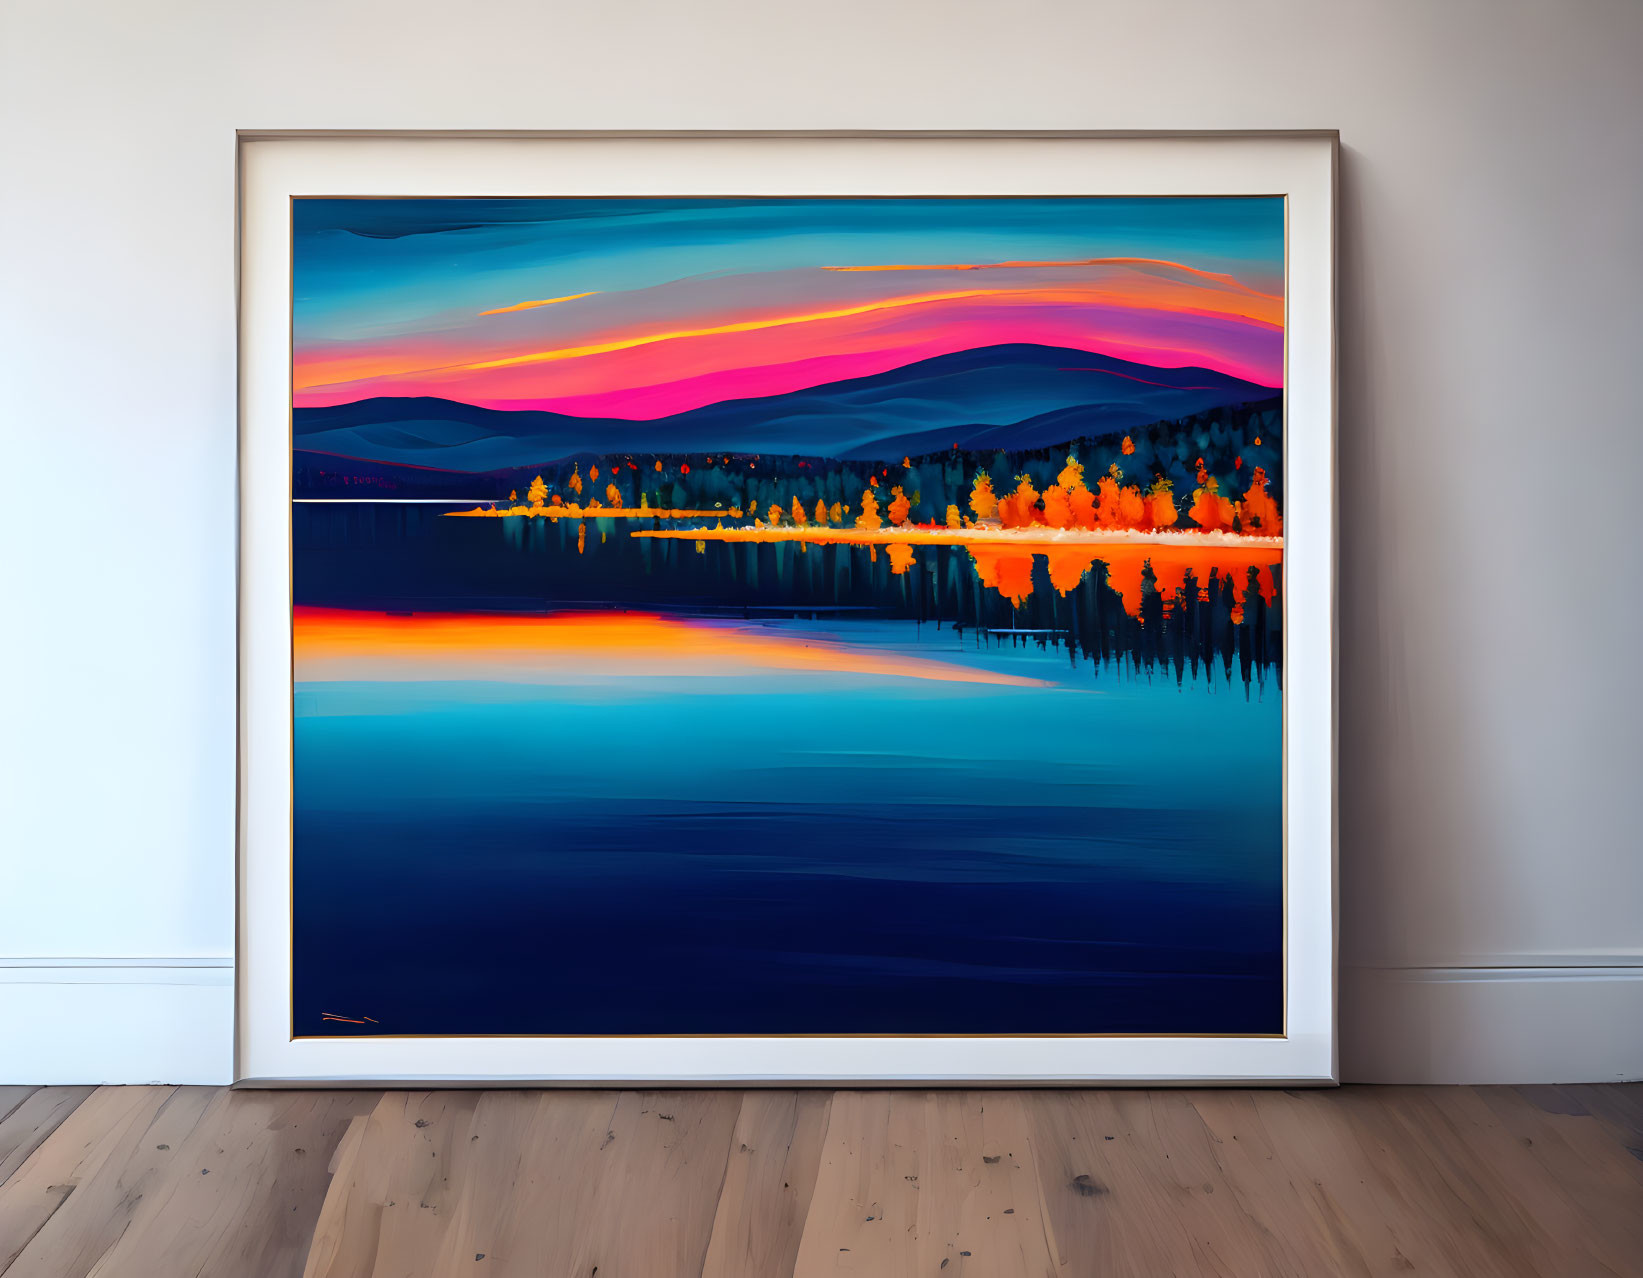 Vibrant sunset landscape painting with lake, trees, and hills